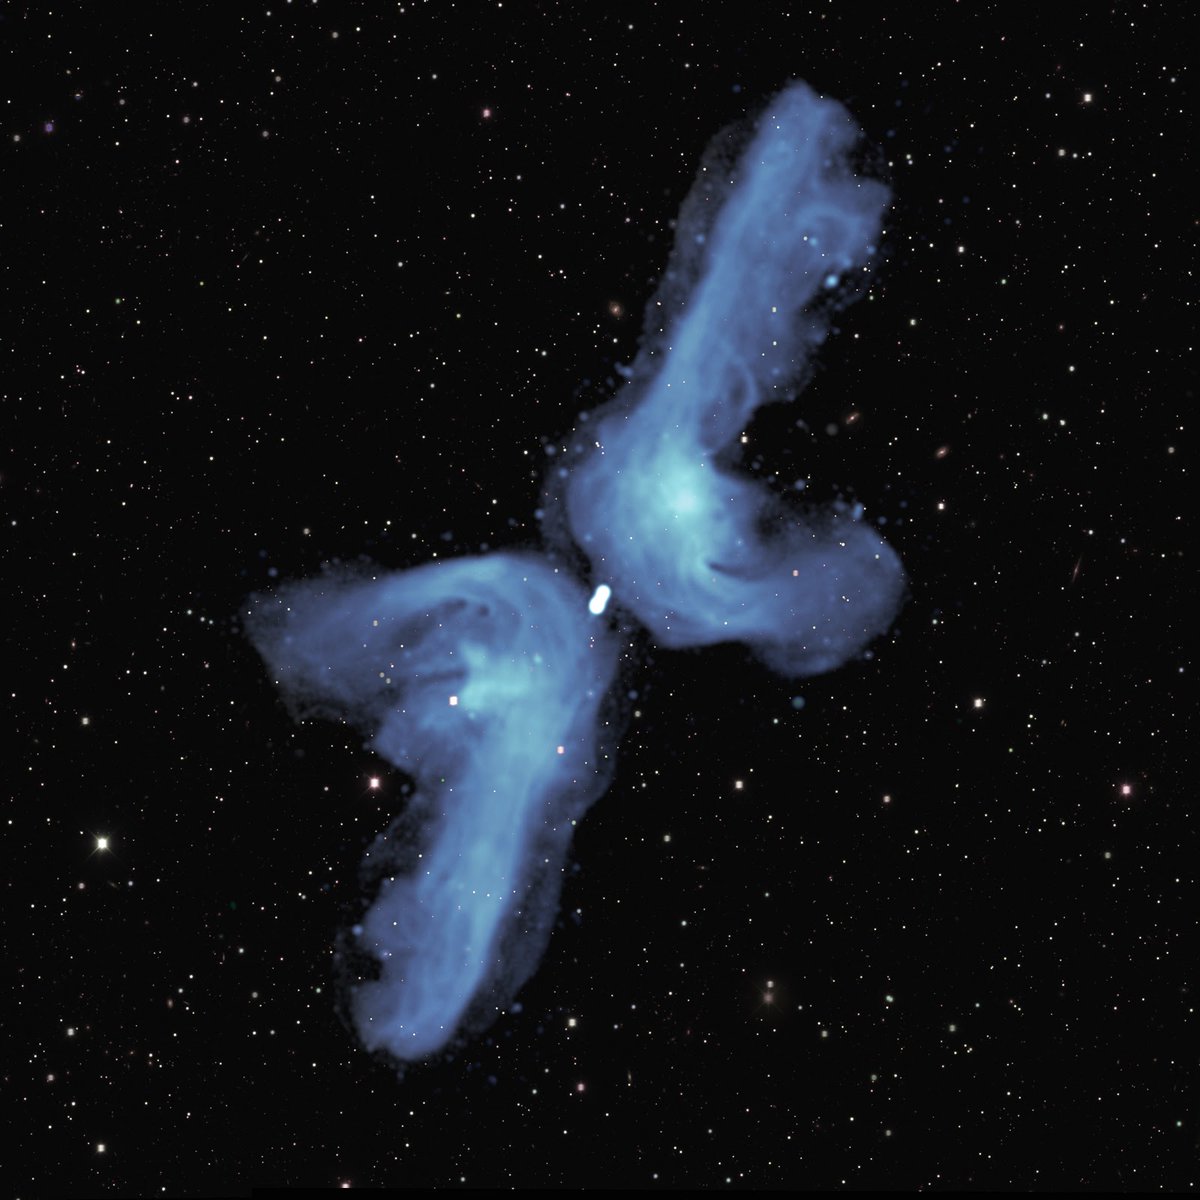 4/ But that radio image in the OP of PGC 064440 doesn't look like that. It's an X! And the jets are thicker, less well defined. What gives?Well, its black hole *used* to be active. For some reason it shut down. Maybe the pantry is empty, nothing more to eat.